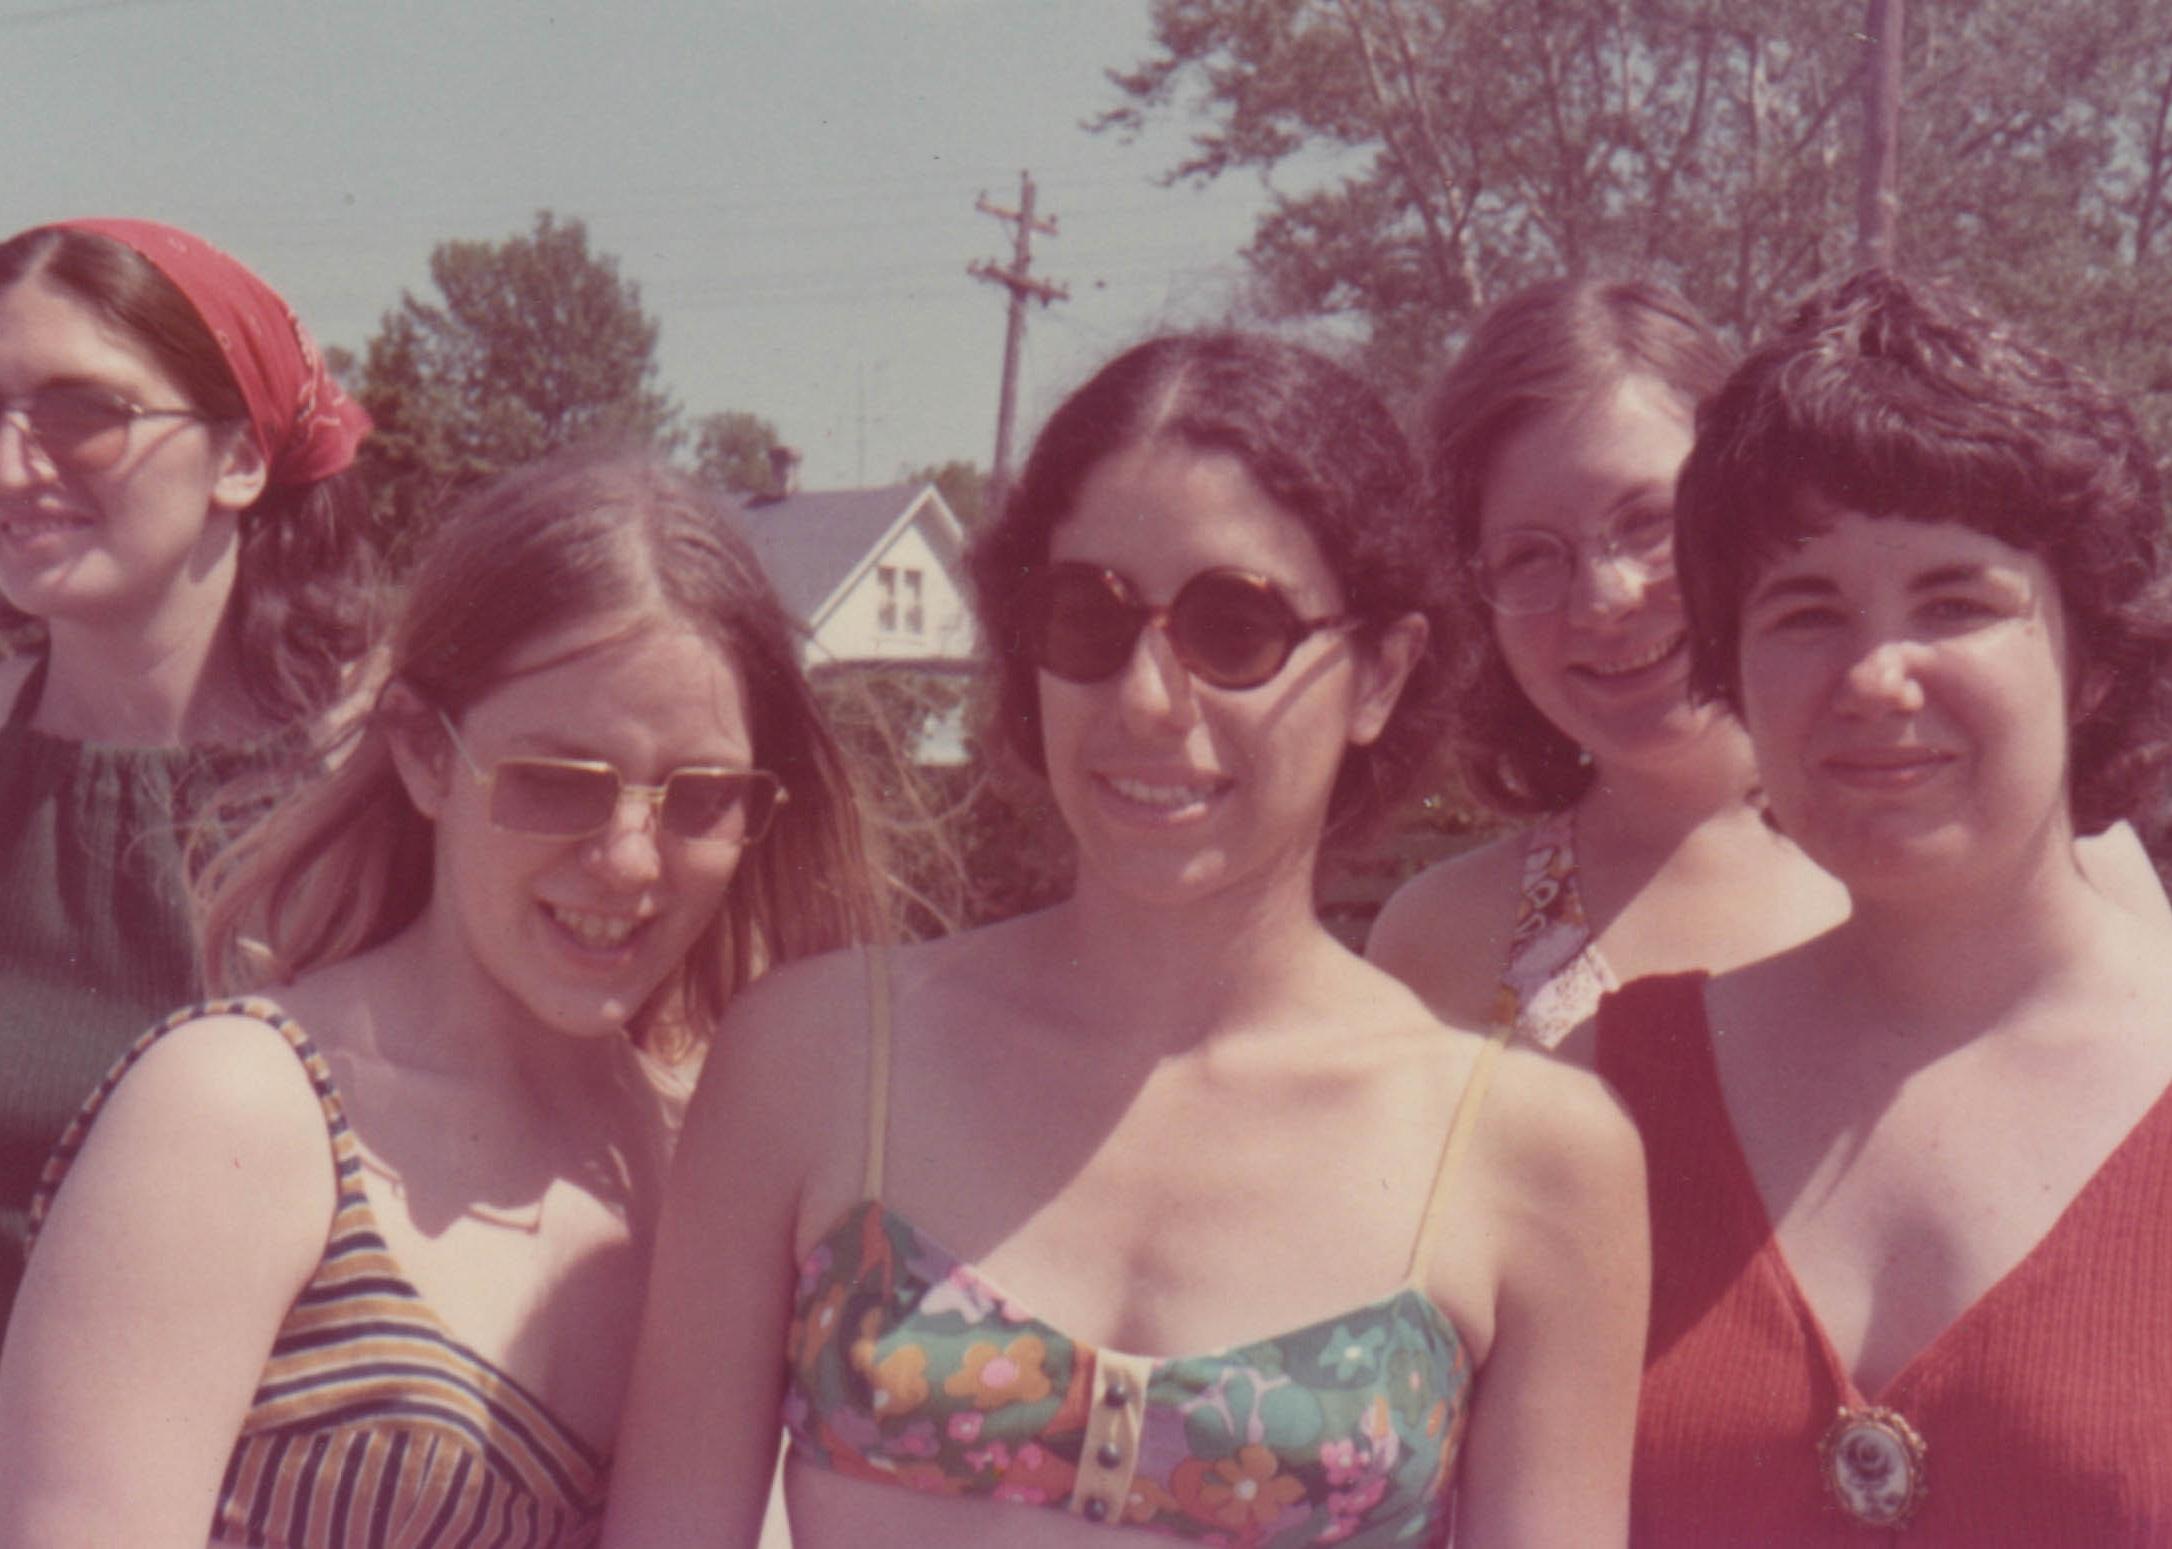 A group of smiling women in 1970s era summer clothes.